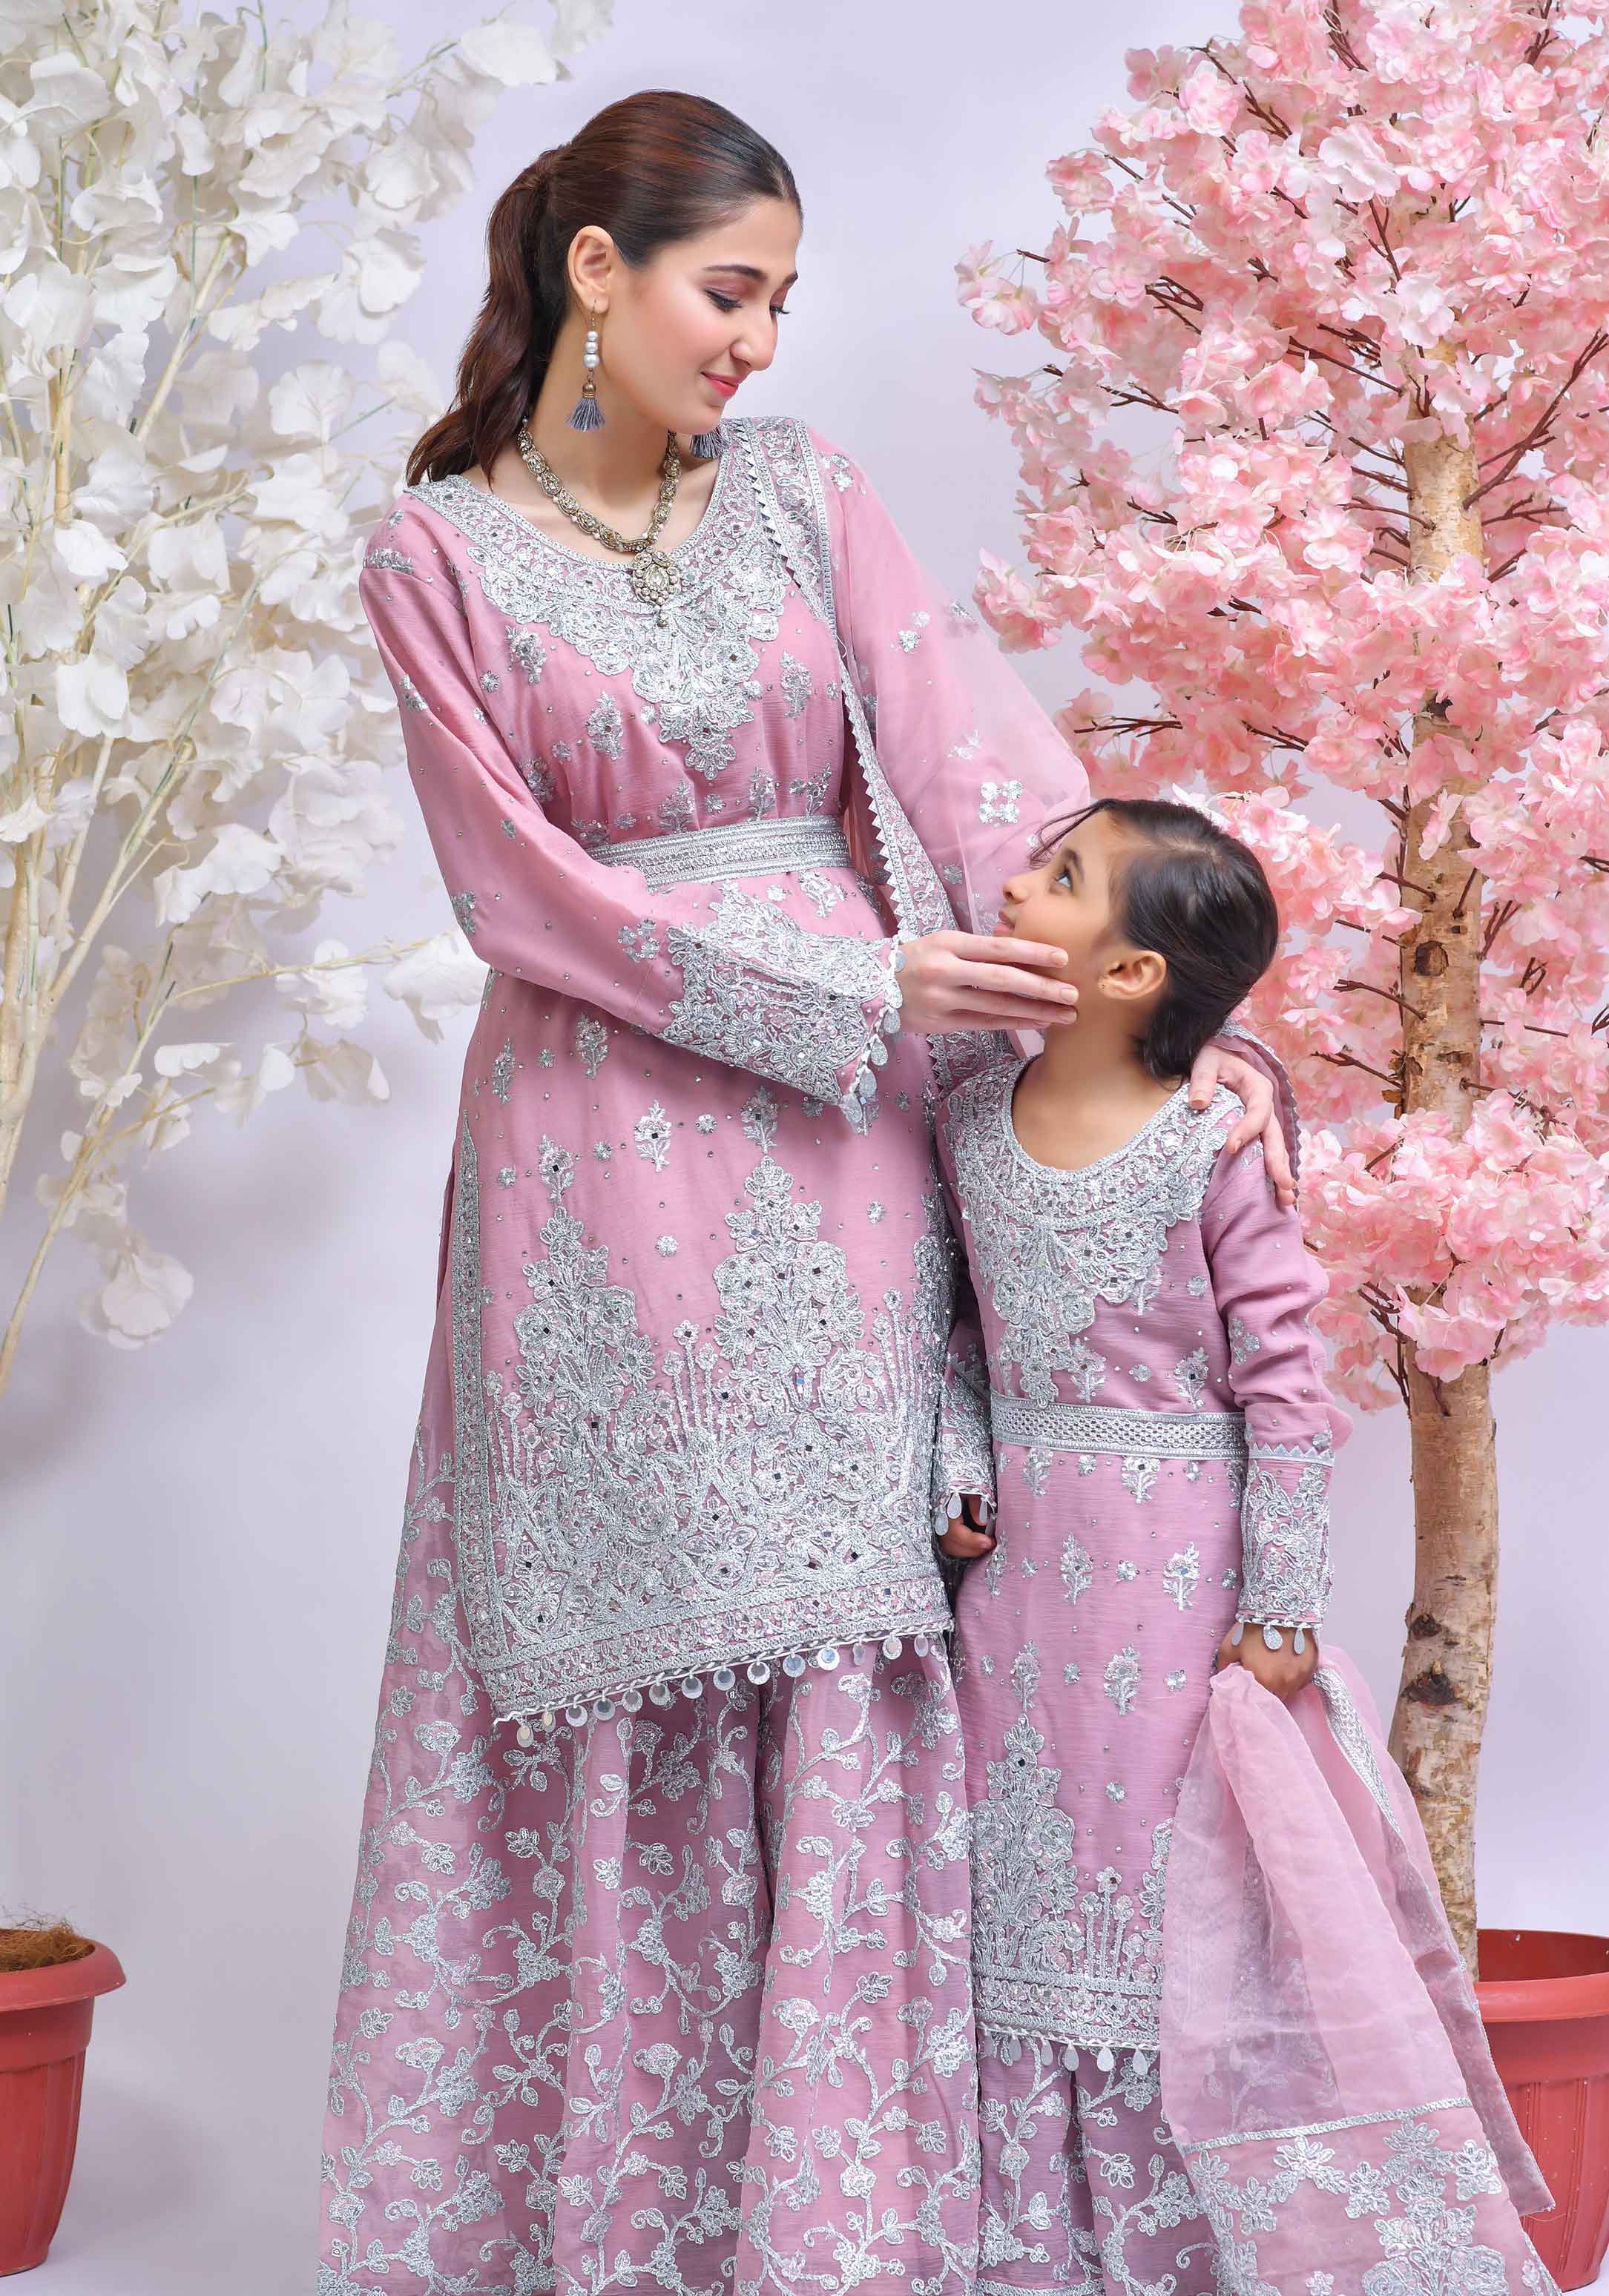 mother and daughter wedding dress